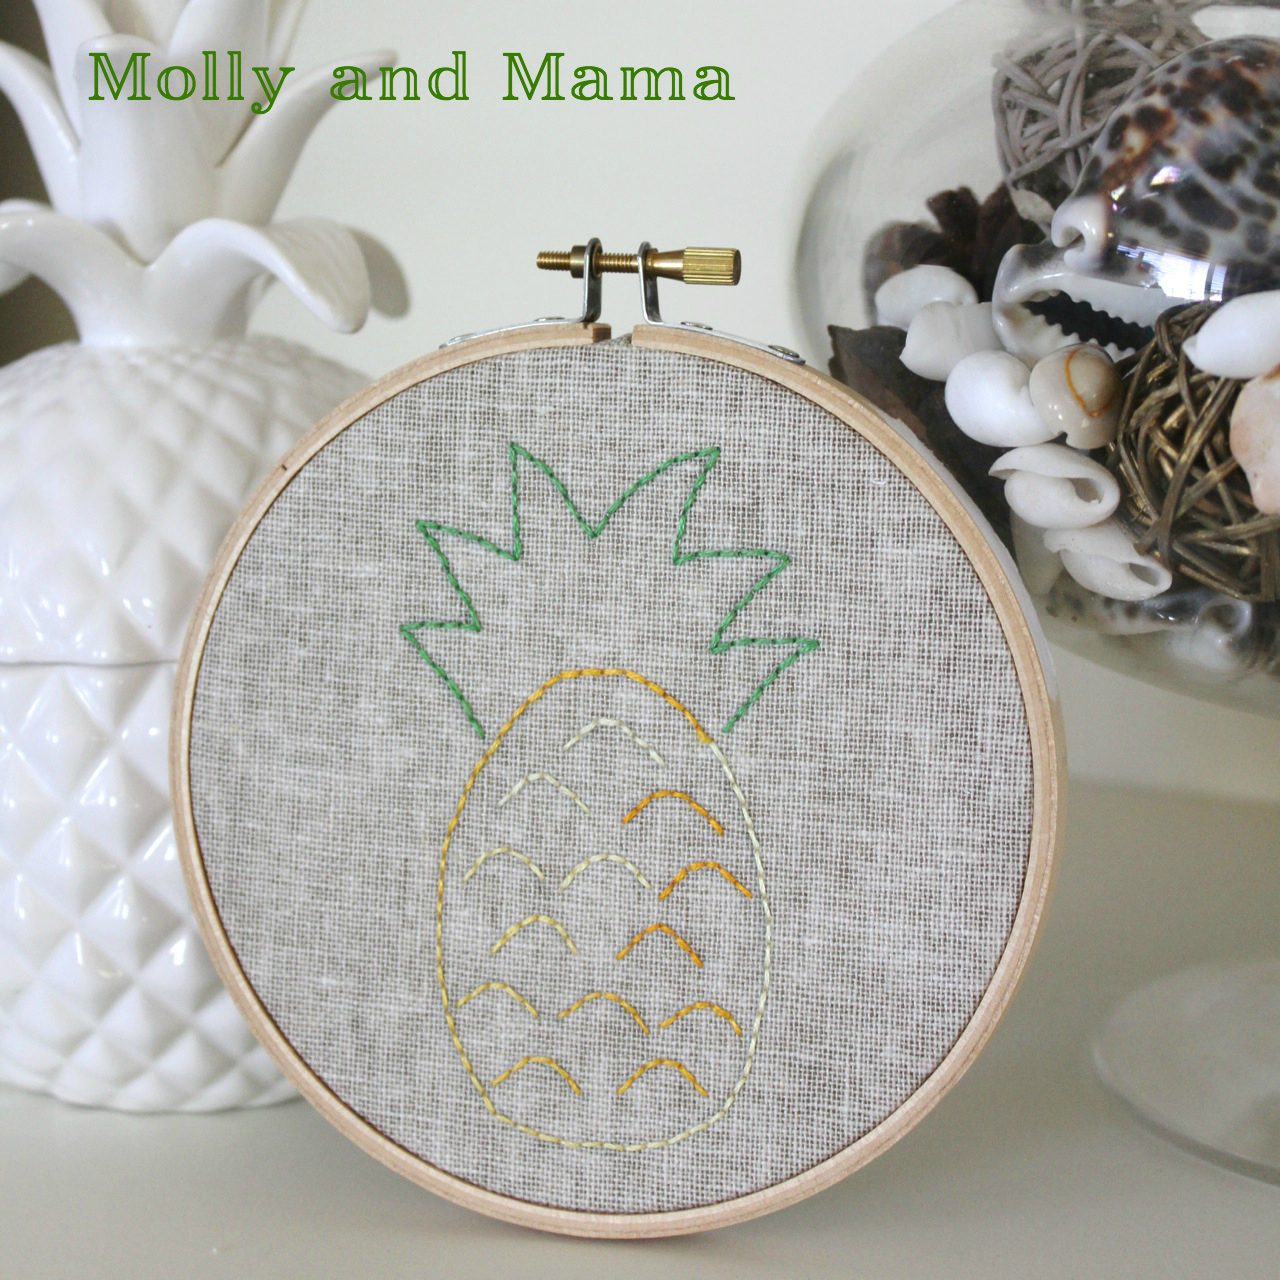 Hand Embroider a Simple Hoop Art Project